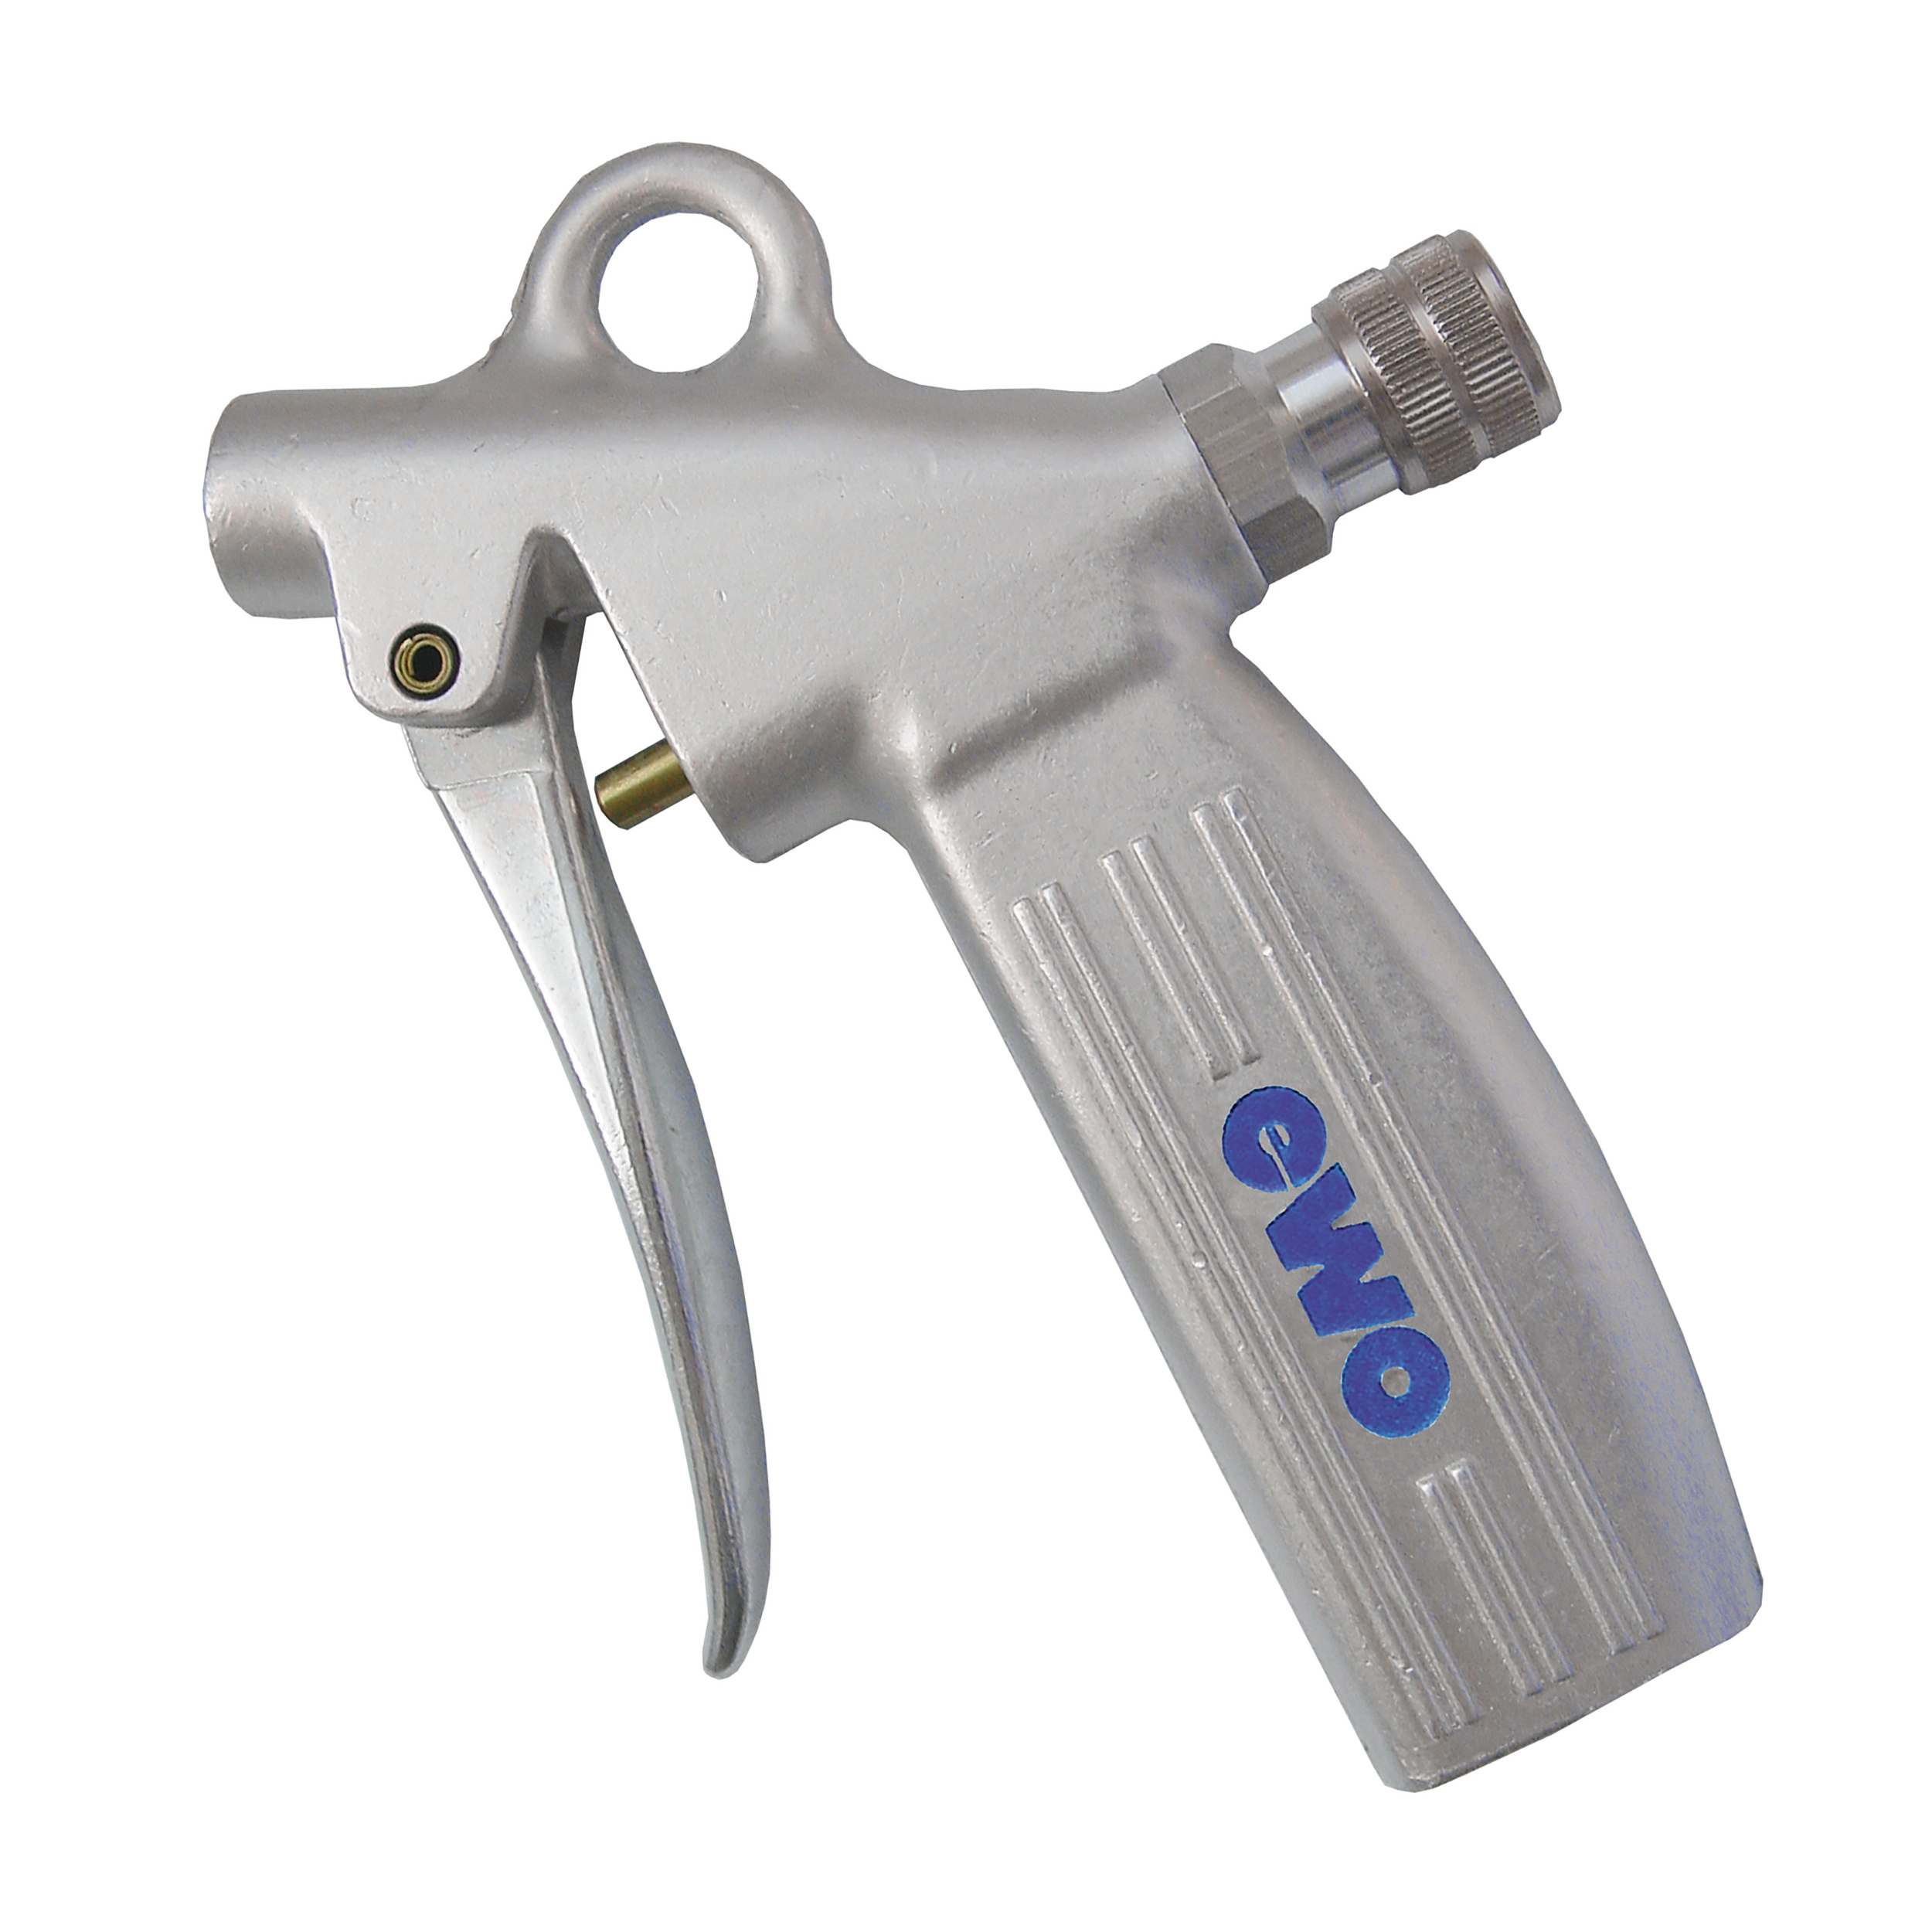 Blow gun blowcontrol, adjustable, throttle screw, inlet: G¼ f, outlet: M12 × 1.25 f, alu, forged, clear anodised, weight: 240 g